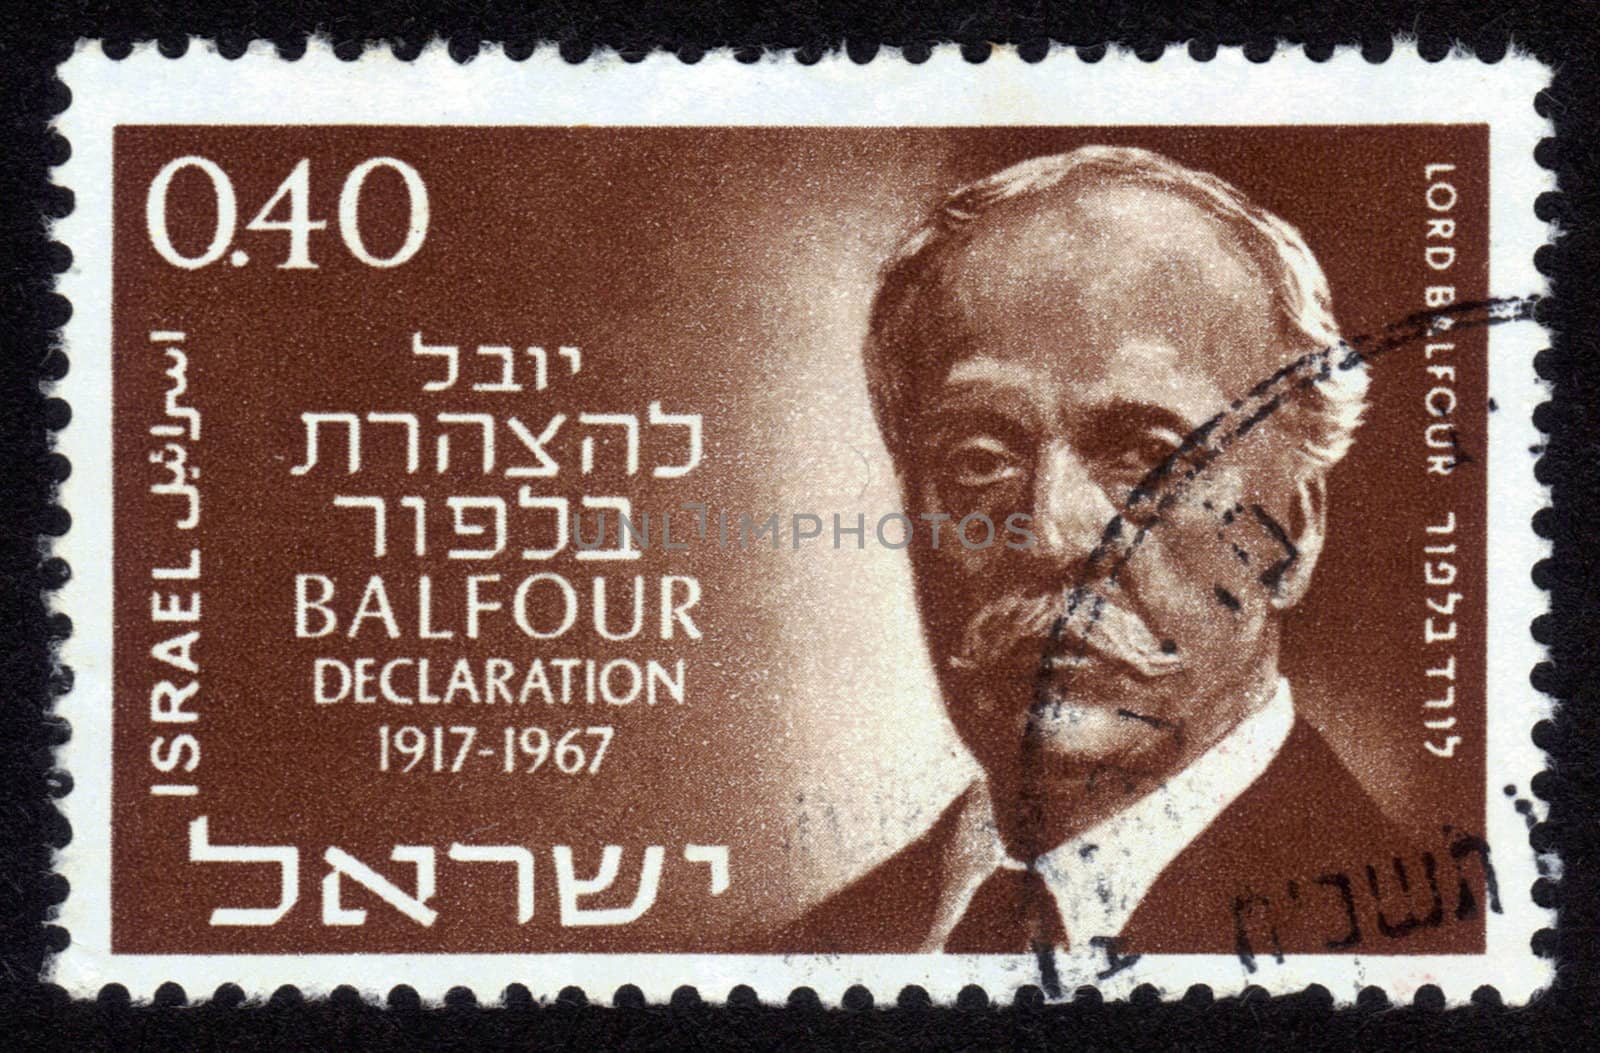 ISRAEL - CIRCA 1967: A stamp printed in ISRAEL shows portrait of Lord Arthur James Balfour, British Foreign Secretary, devoted to the 50th anniversary of the Balfour Declaration, circa 1967